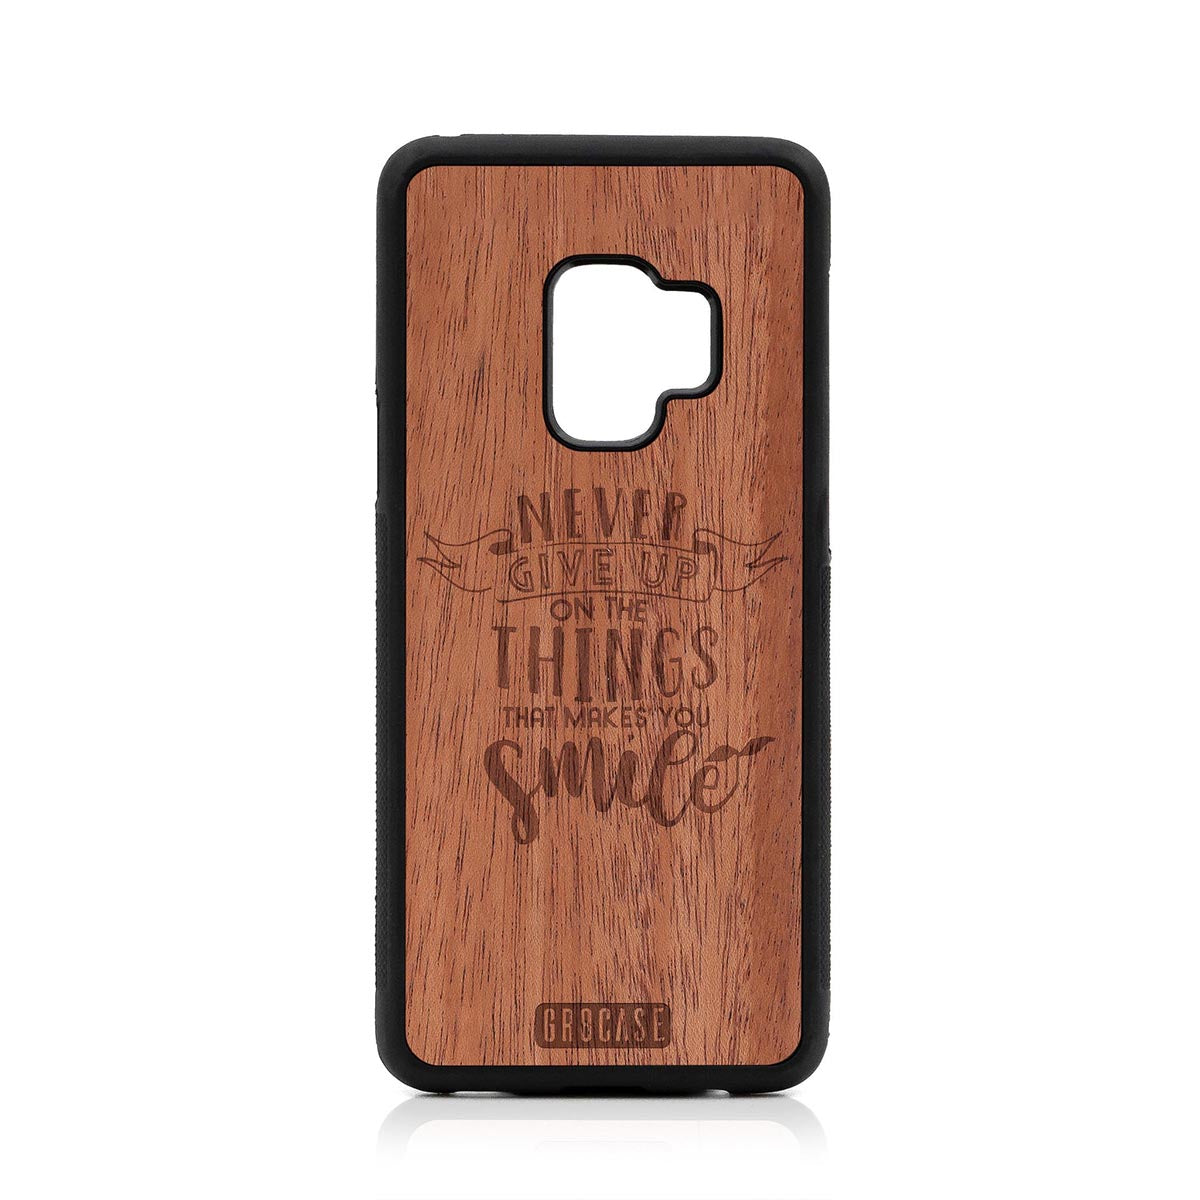 Never Give Up On The Things That Makes You Smile Design Wood Case Samsung Galaxy S9 by GR8CASE